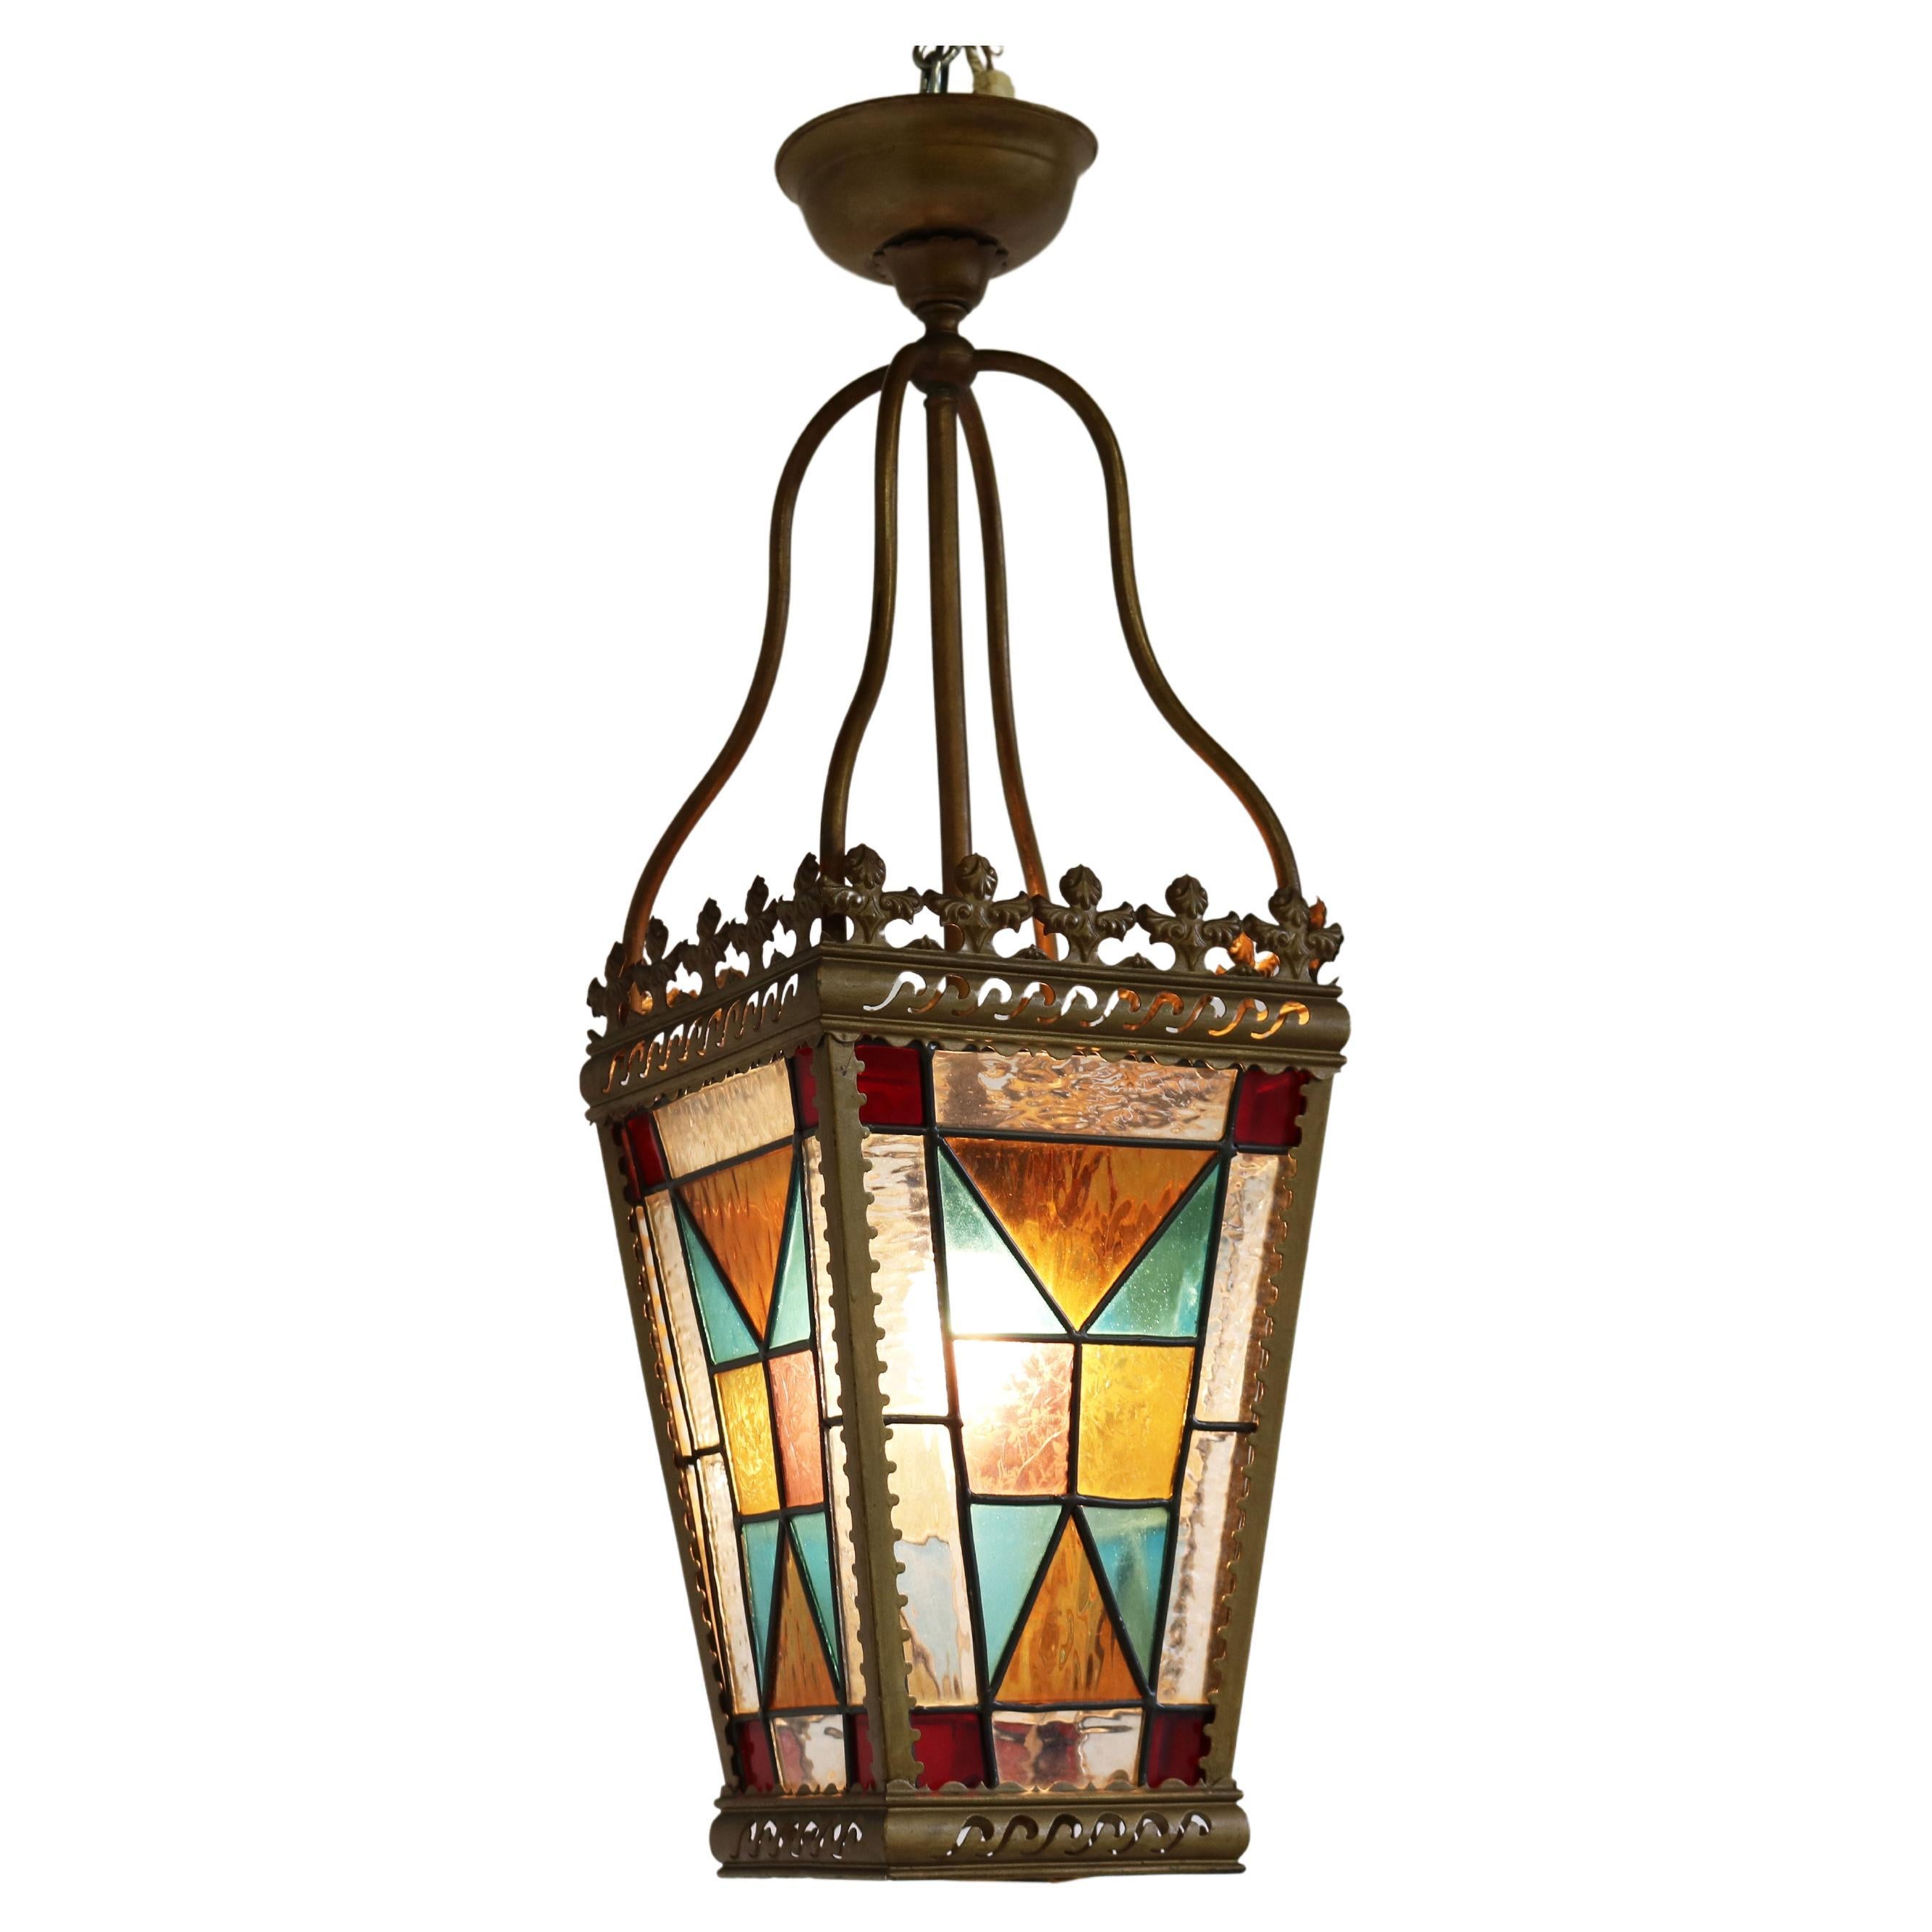 Early 1900 English Victorian Lantern Light Hallway Stained Glass Brass Pendant